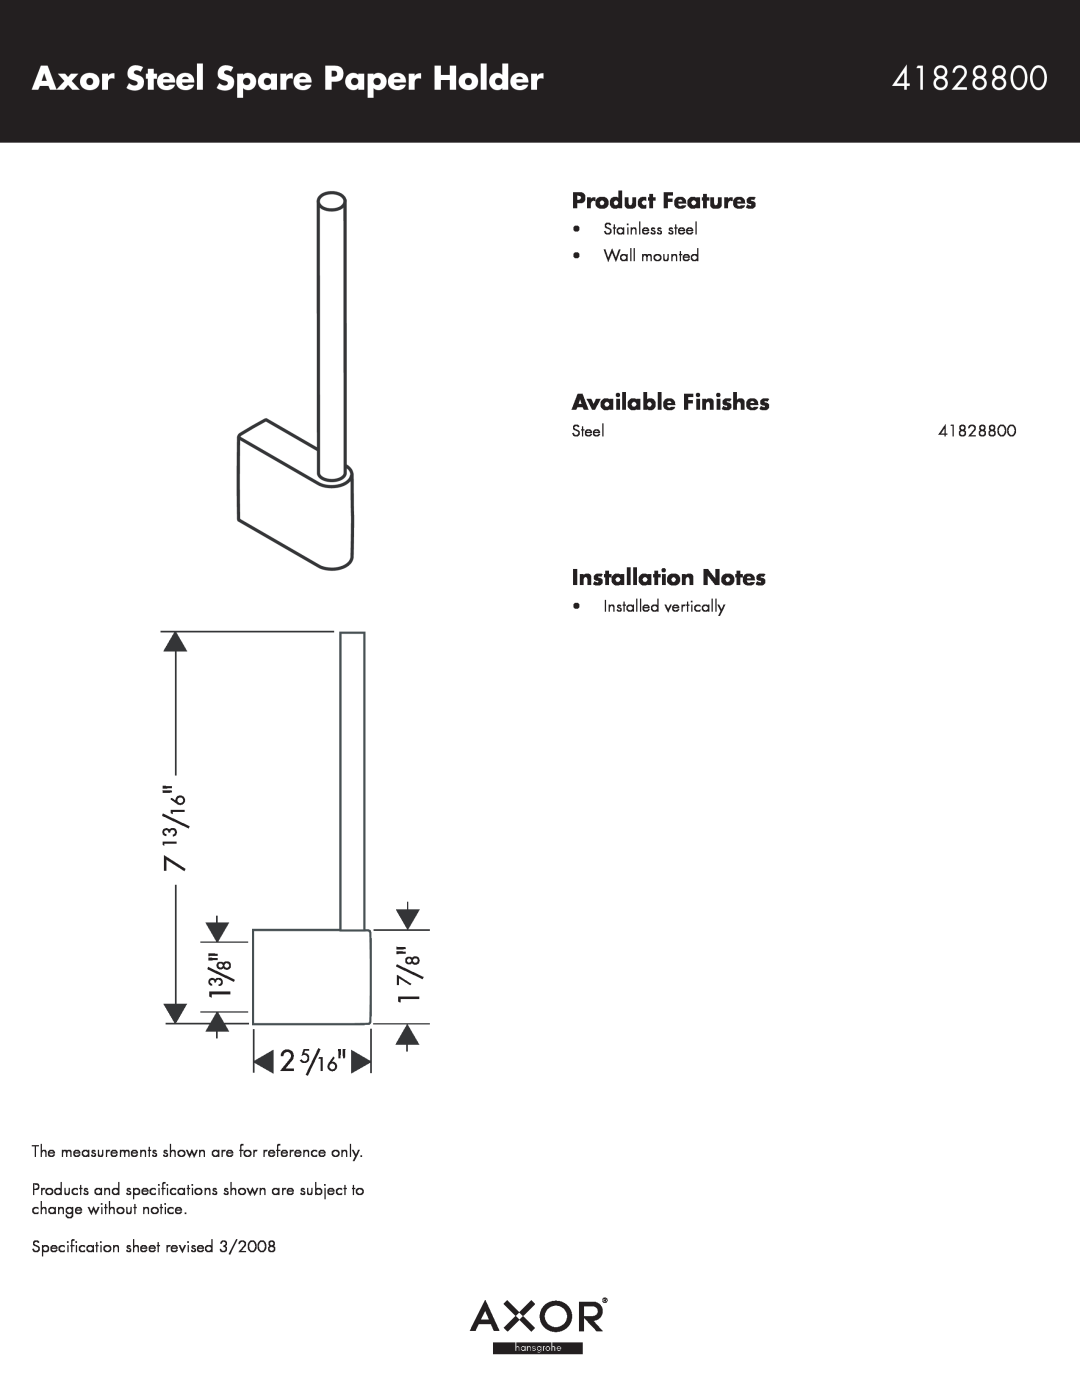 Axor 41828800 specifications Axor Steel Spare Paper Holder, Product Features, Available Finishes, Installation Notes 